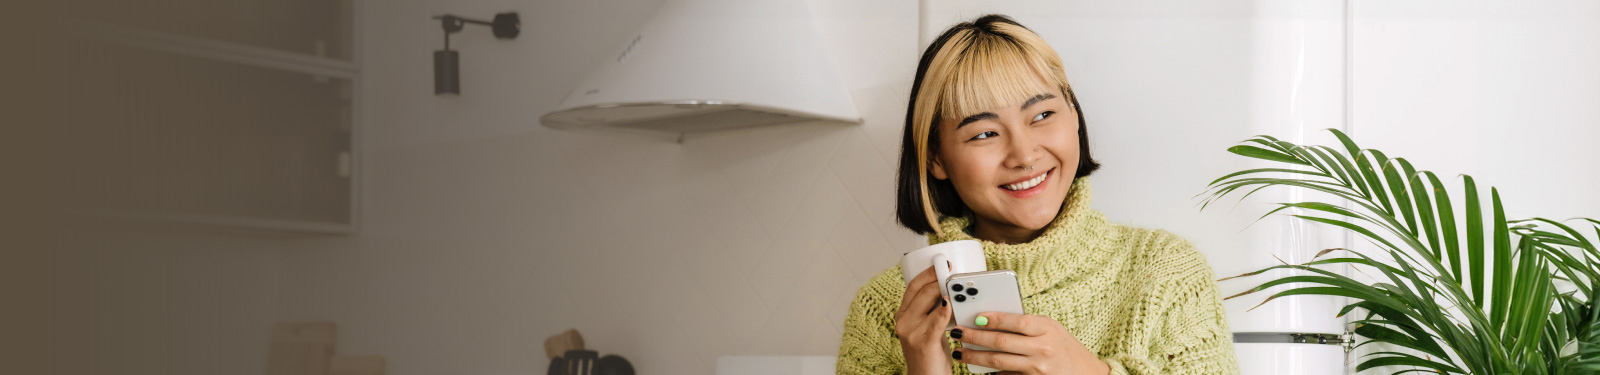 Asian woman drinking holding a coffee mug and mobile phone and smiling.